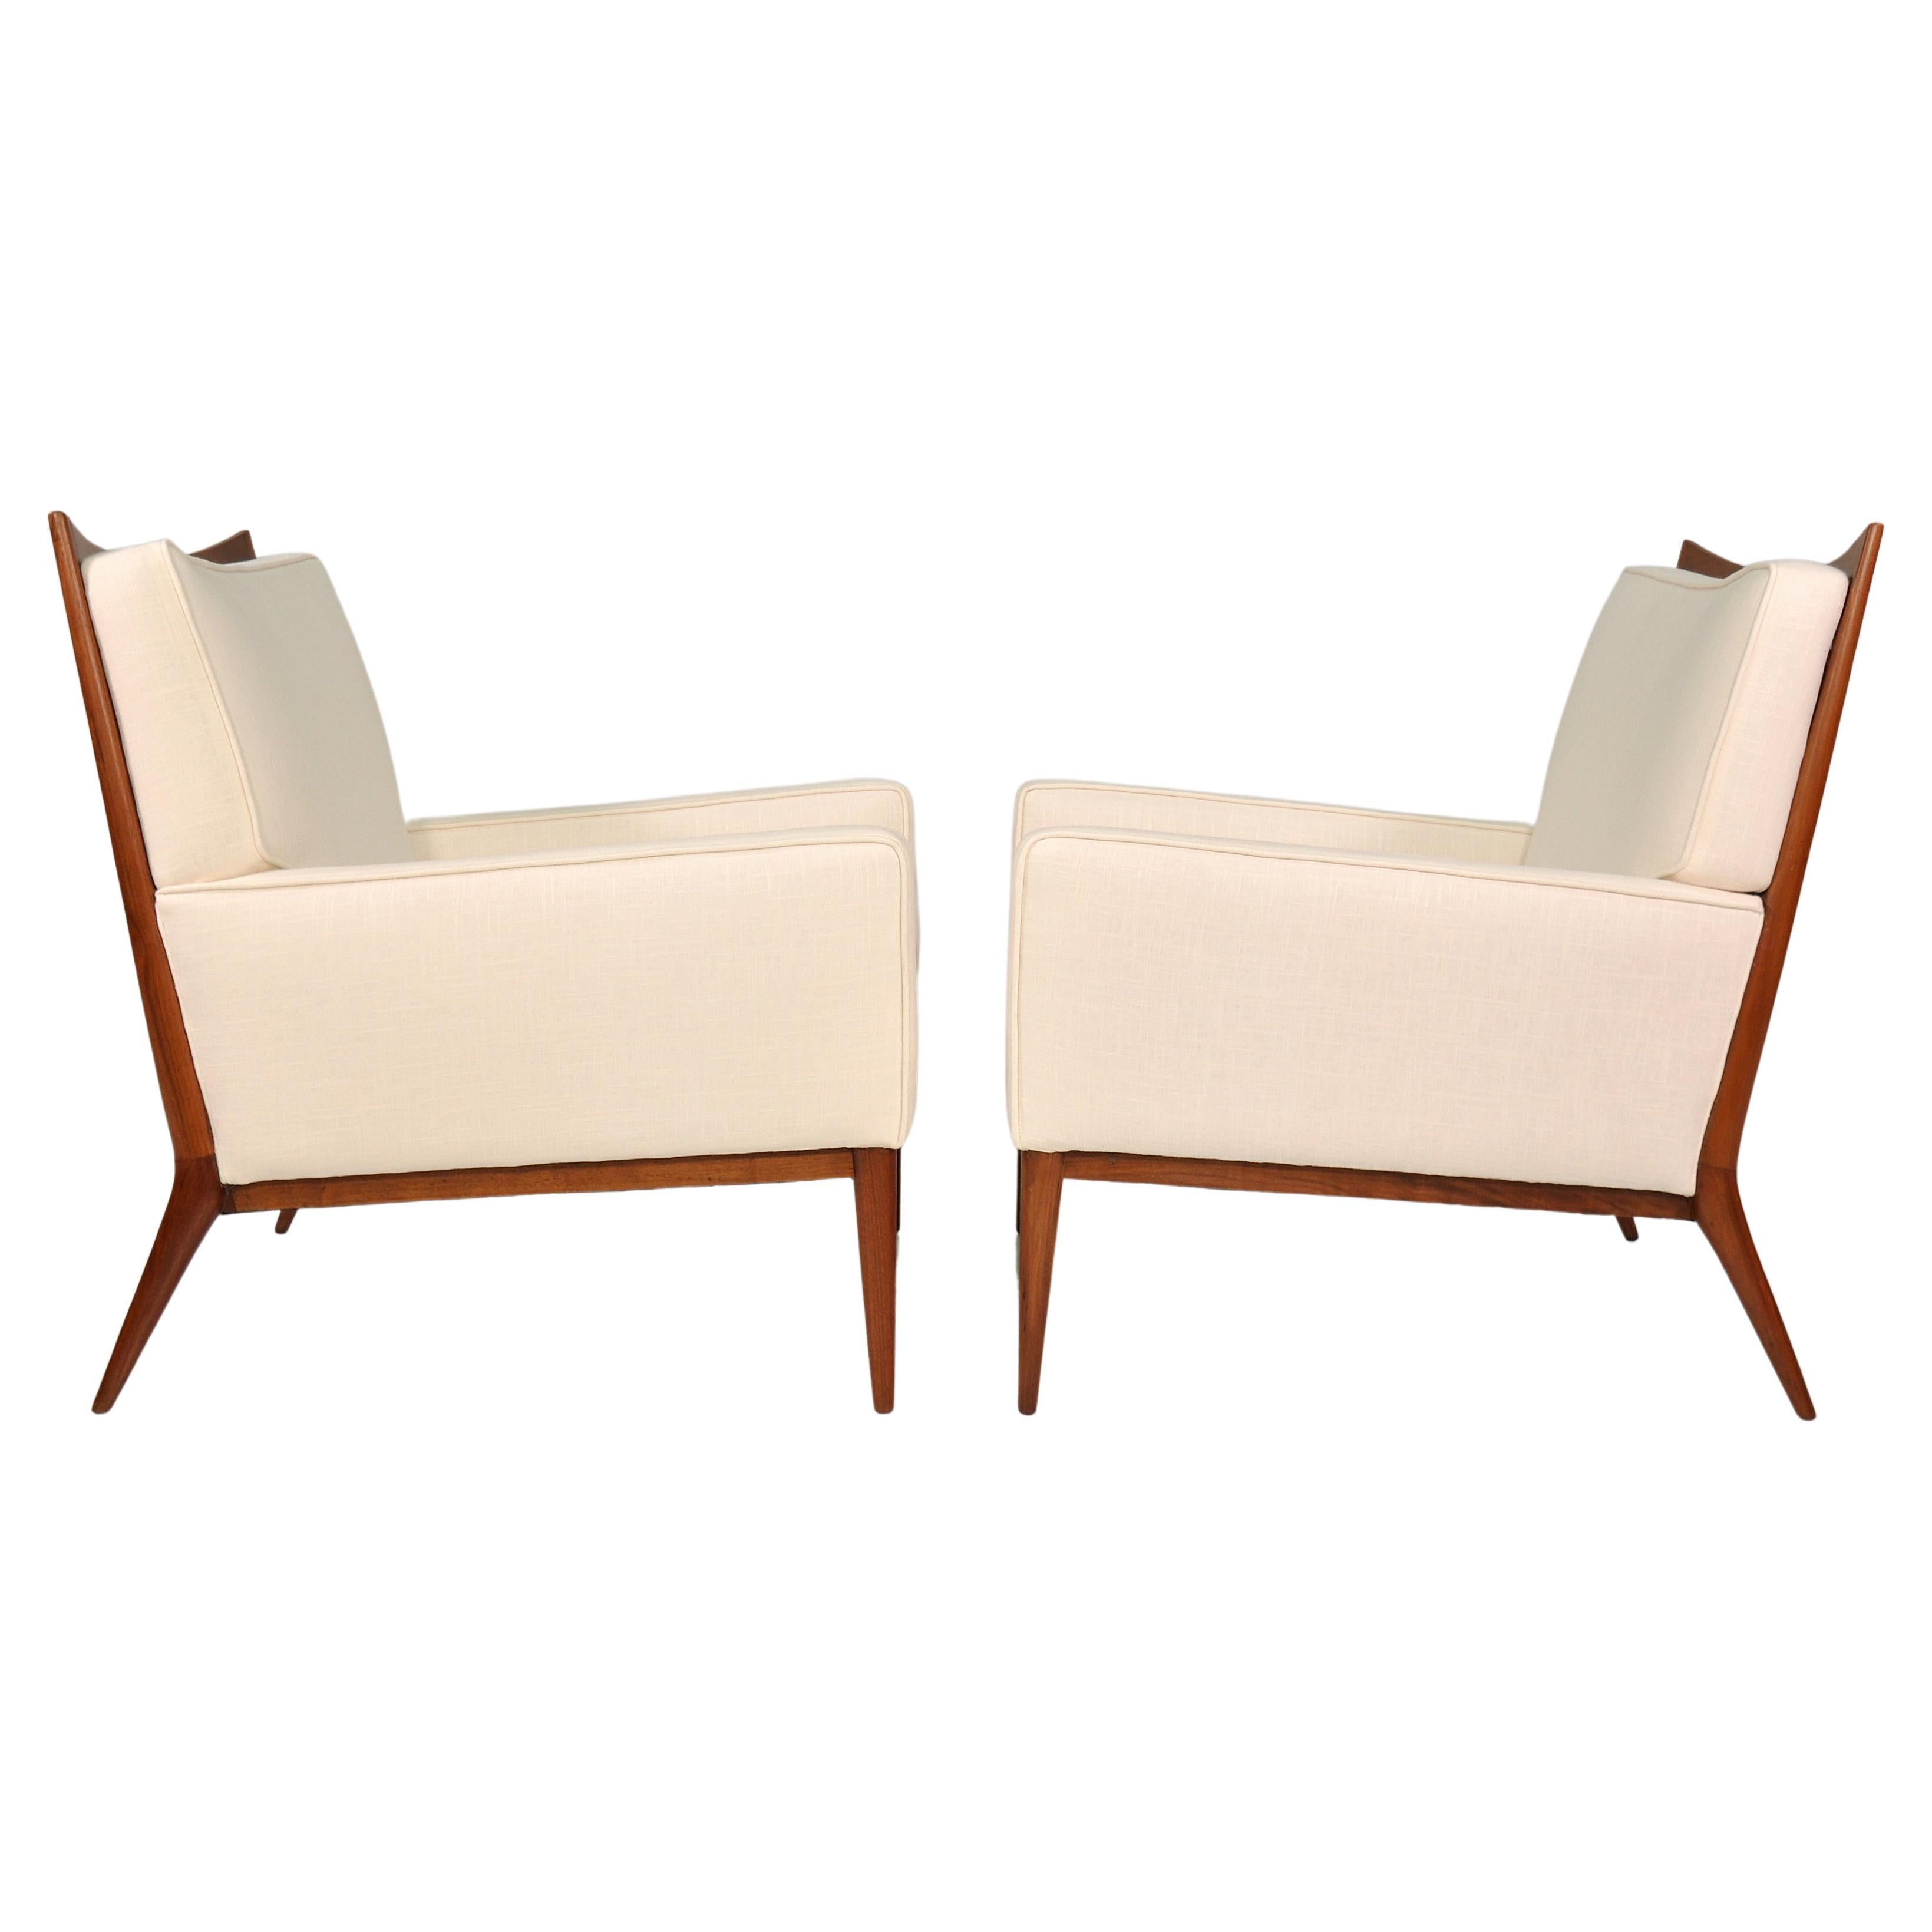 Exquisite pair of Paul McCobb Mid-Century Modern model 1322 armchairs from the coveted Directional collection, dating from the 1950s. The refinished chairs have been recovered in an off-white Belgian linen. The beautifully sculpted walnut frames